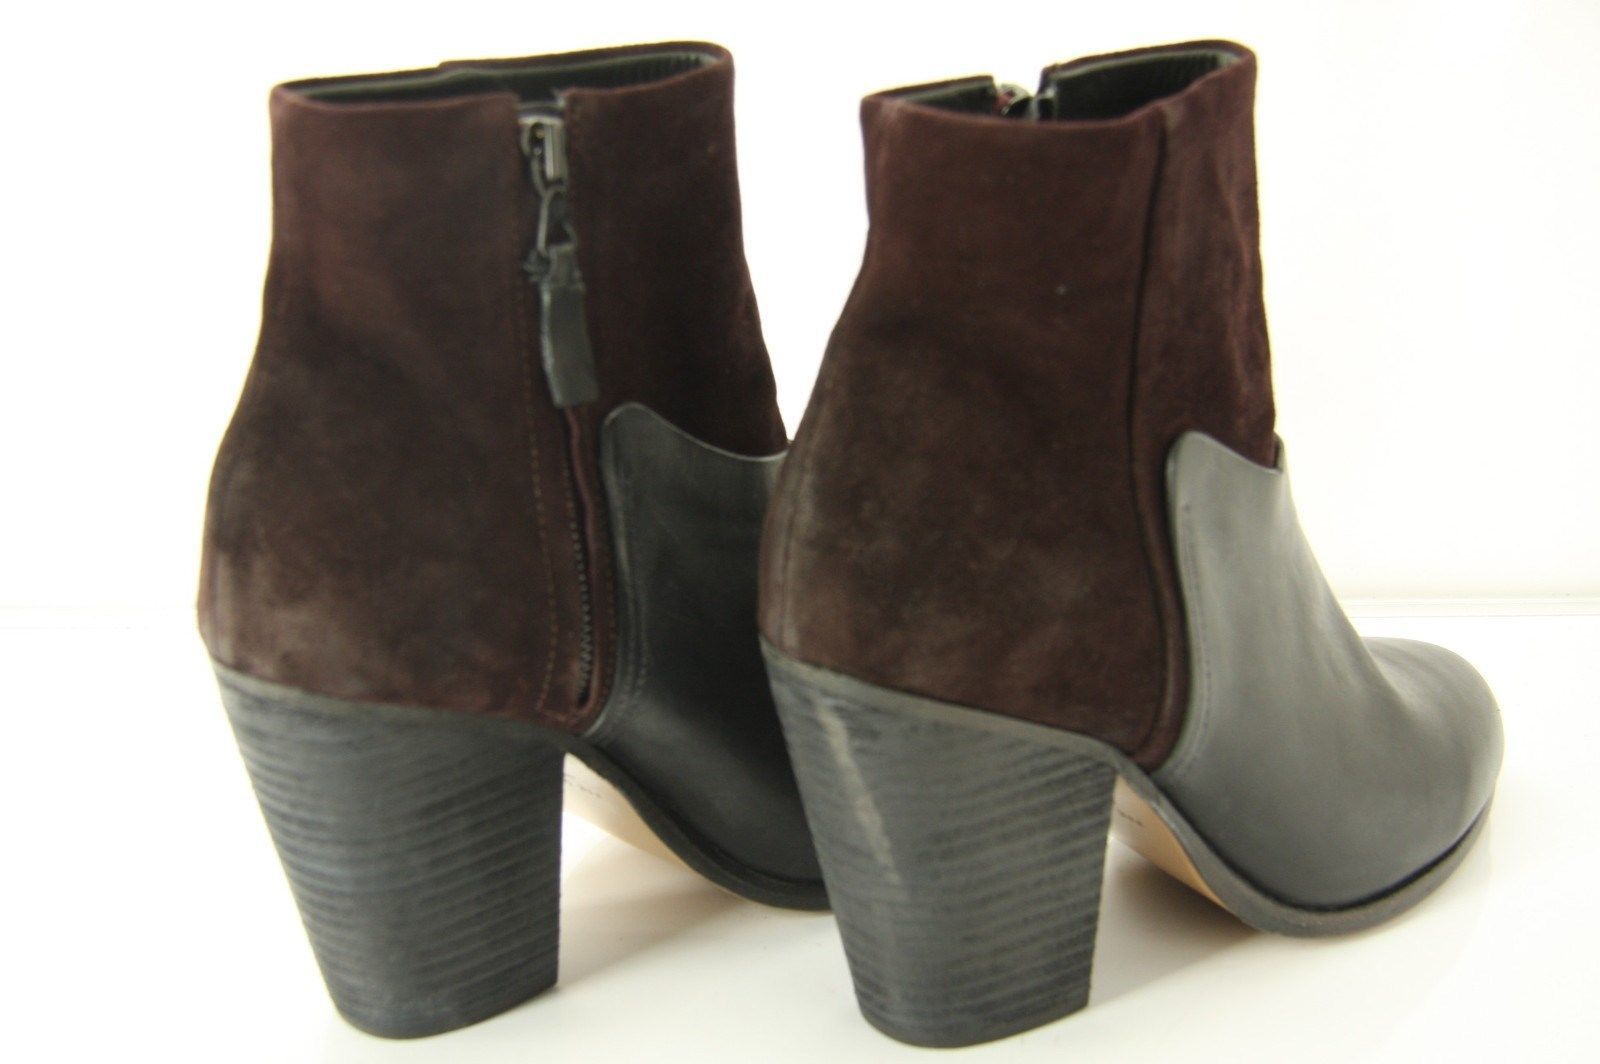 Rag & Bone Kendall Suede Leather Block Heel Ankle Boots size 40 10 NIB $550